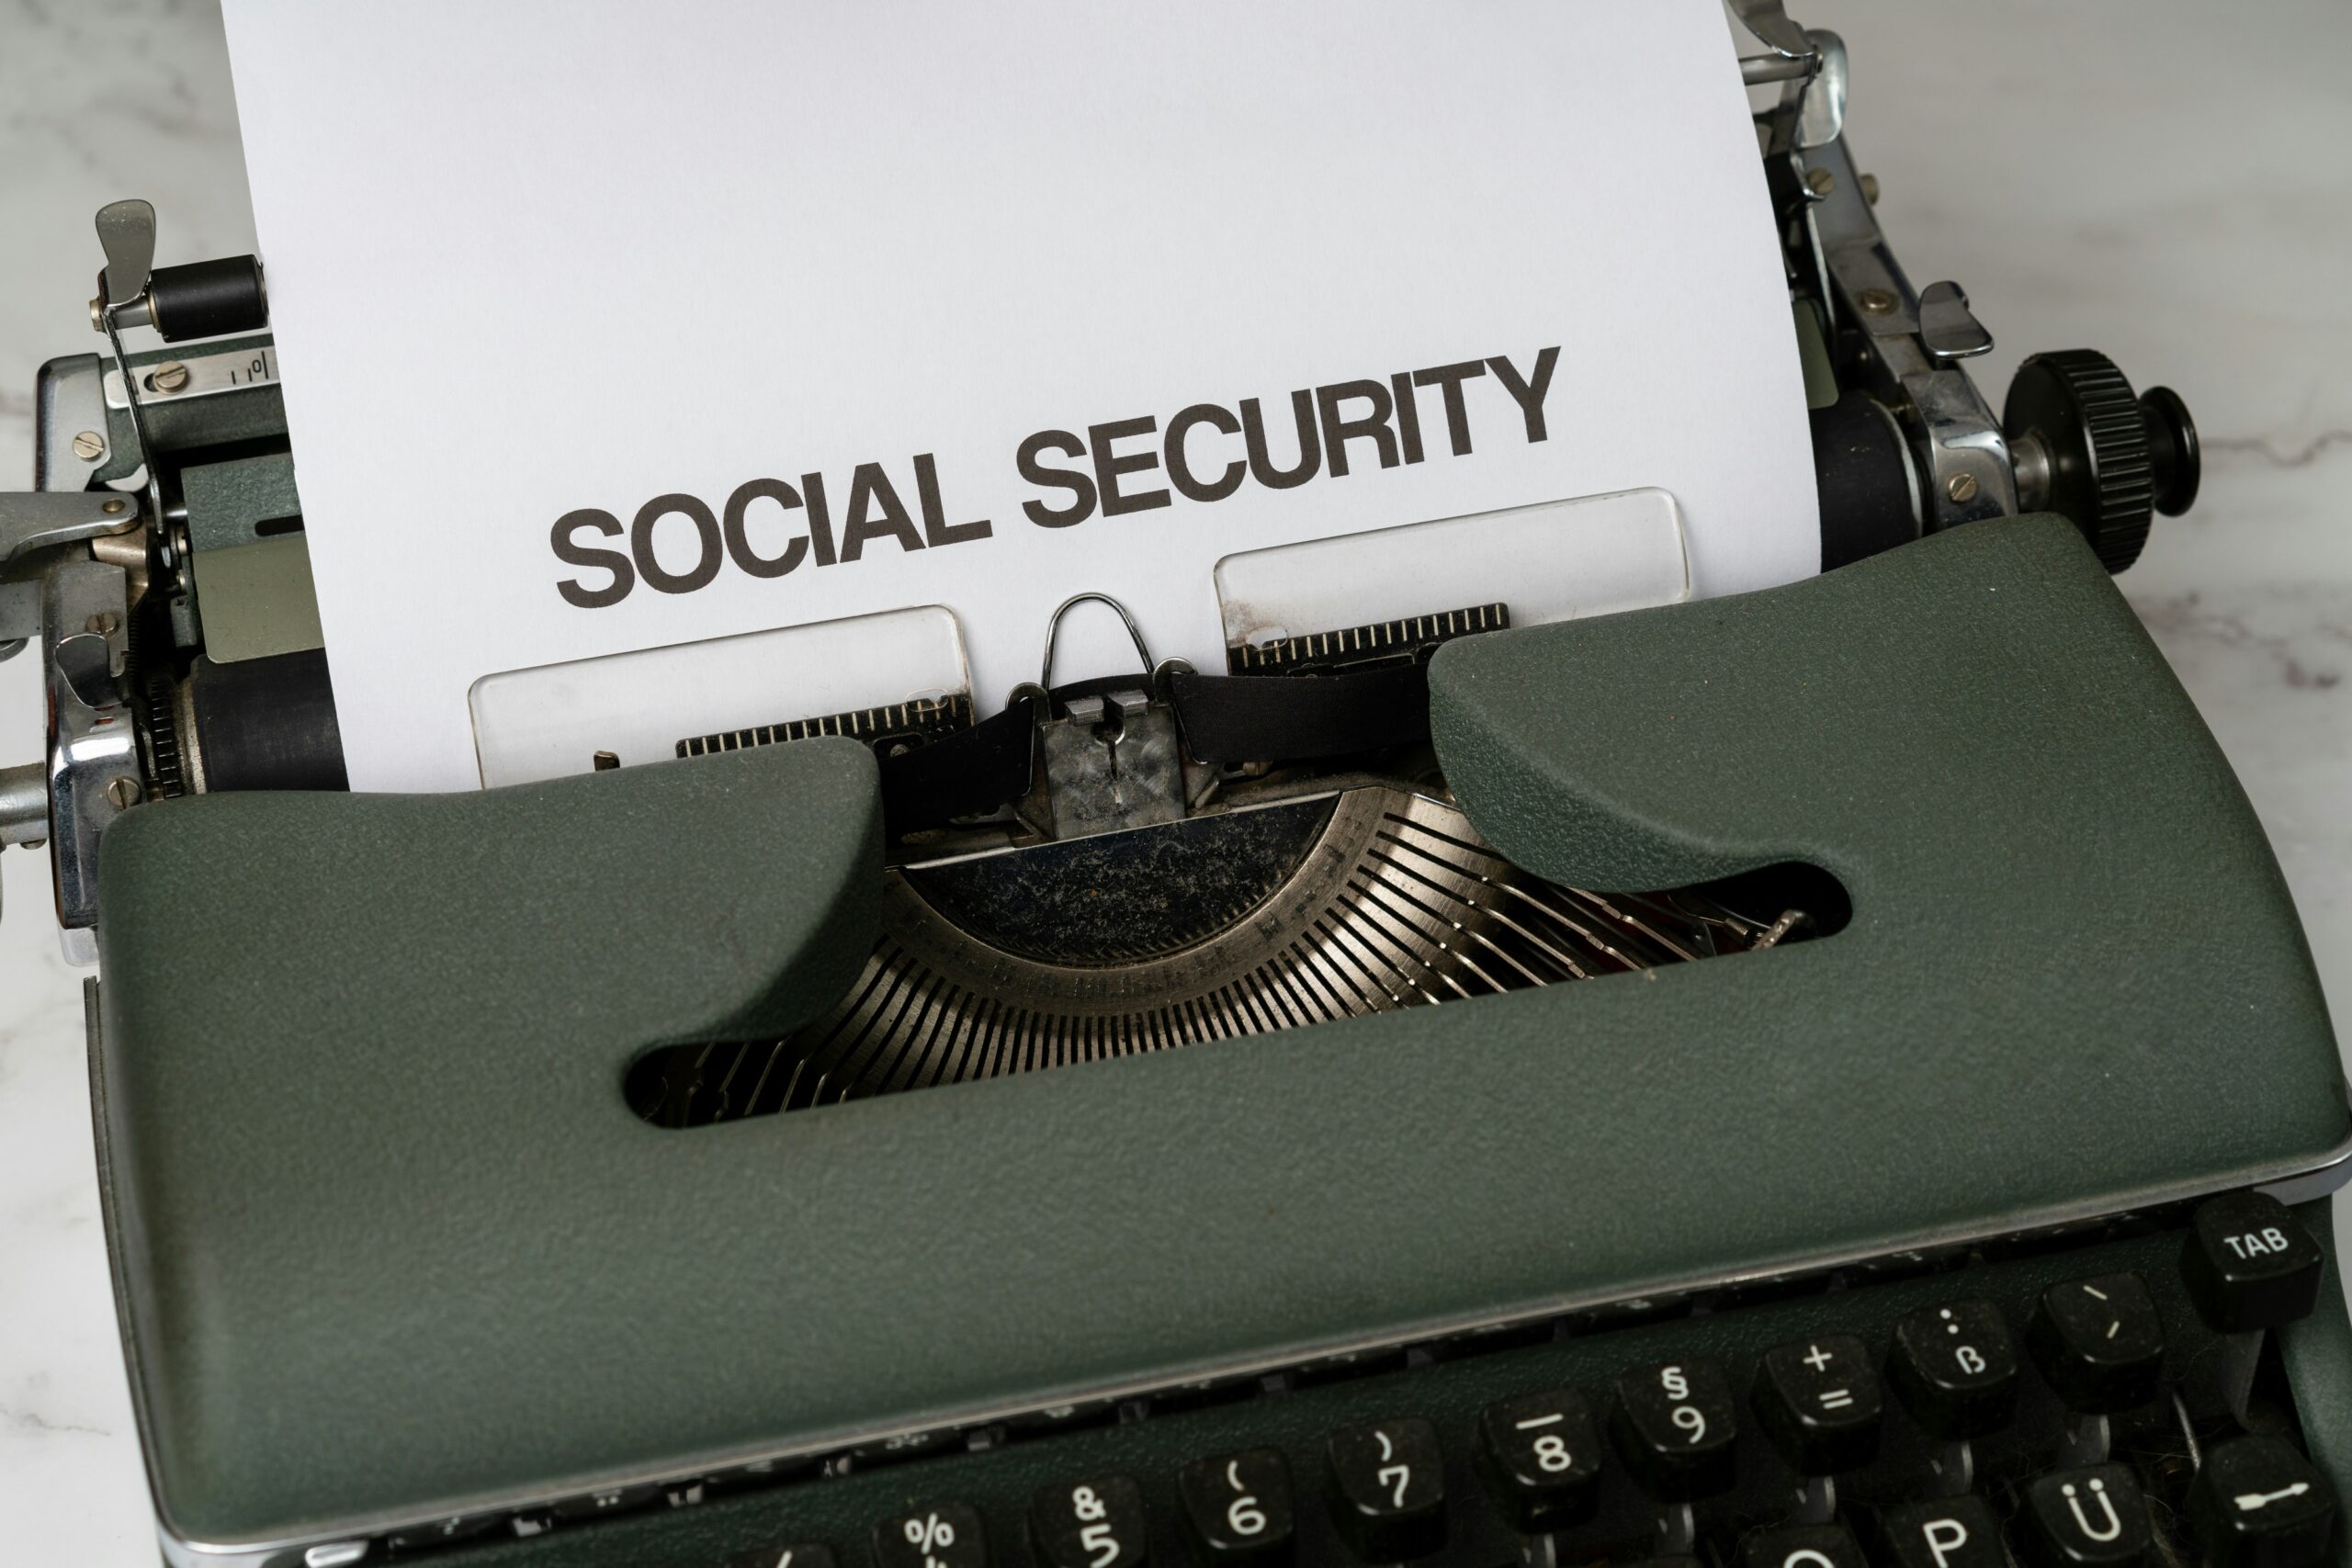 Government Consulting Firm Hacked: 340,000 Social Security Numbers Taken